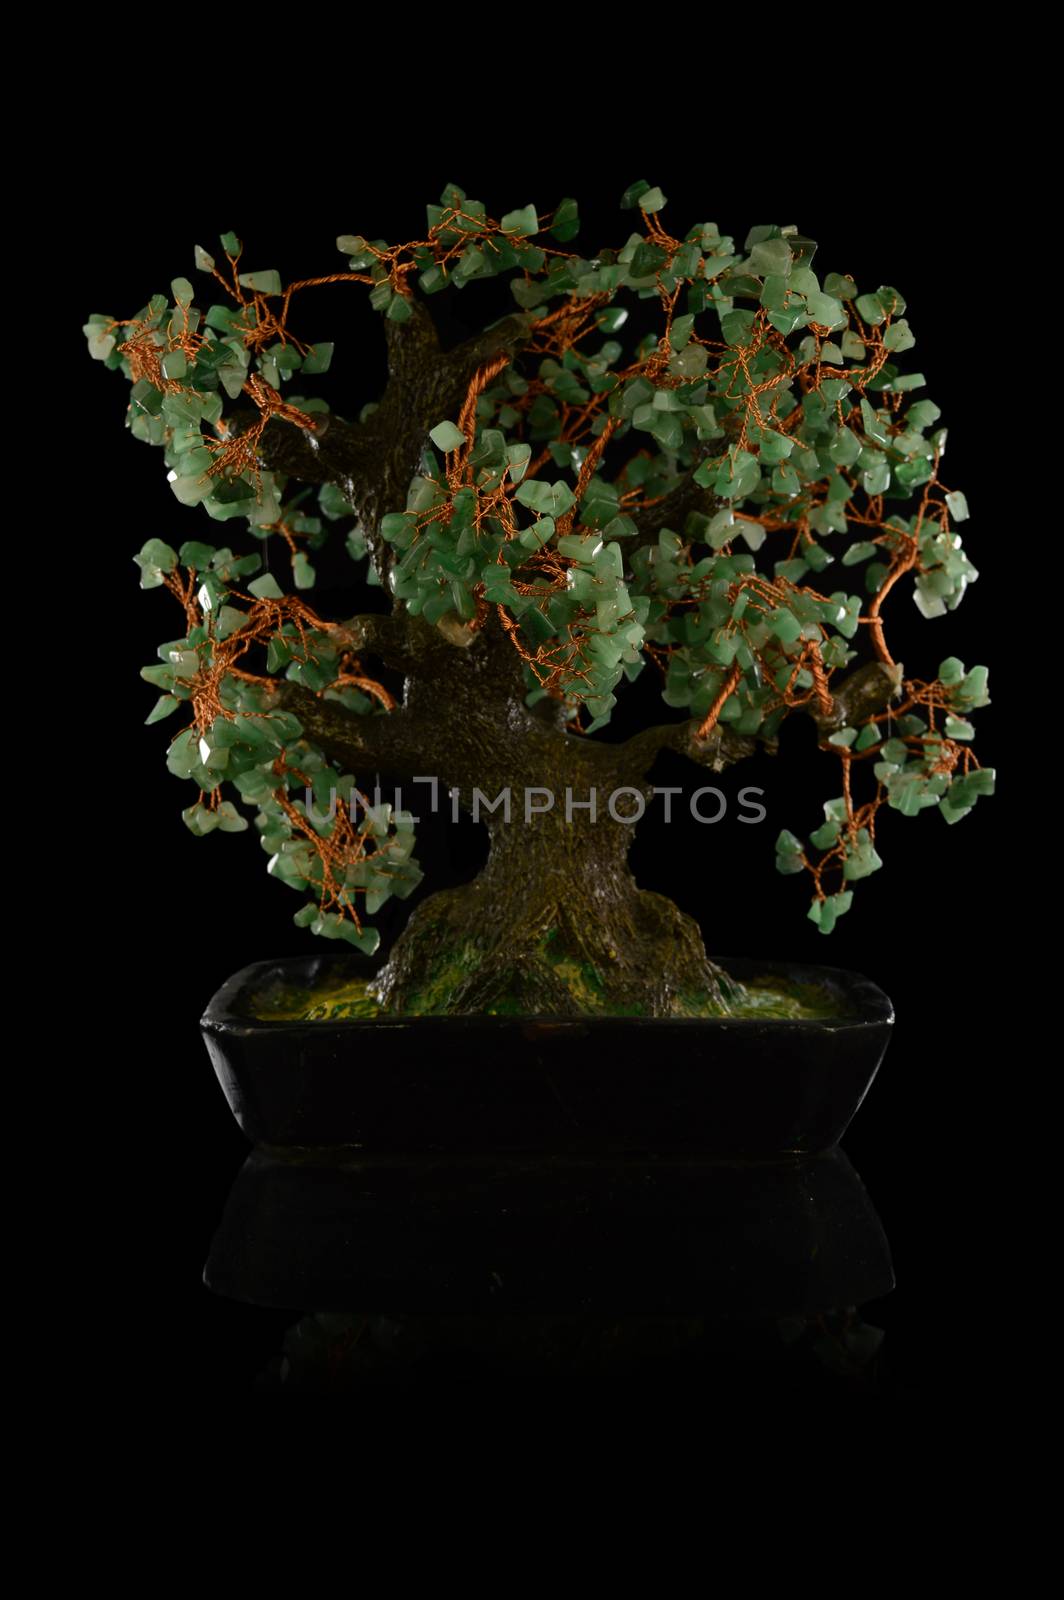 An isolated over black background image of a copper wire money tree to bring good luck and prosperisty.